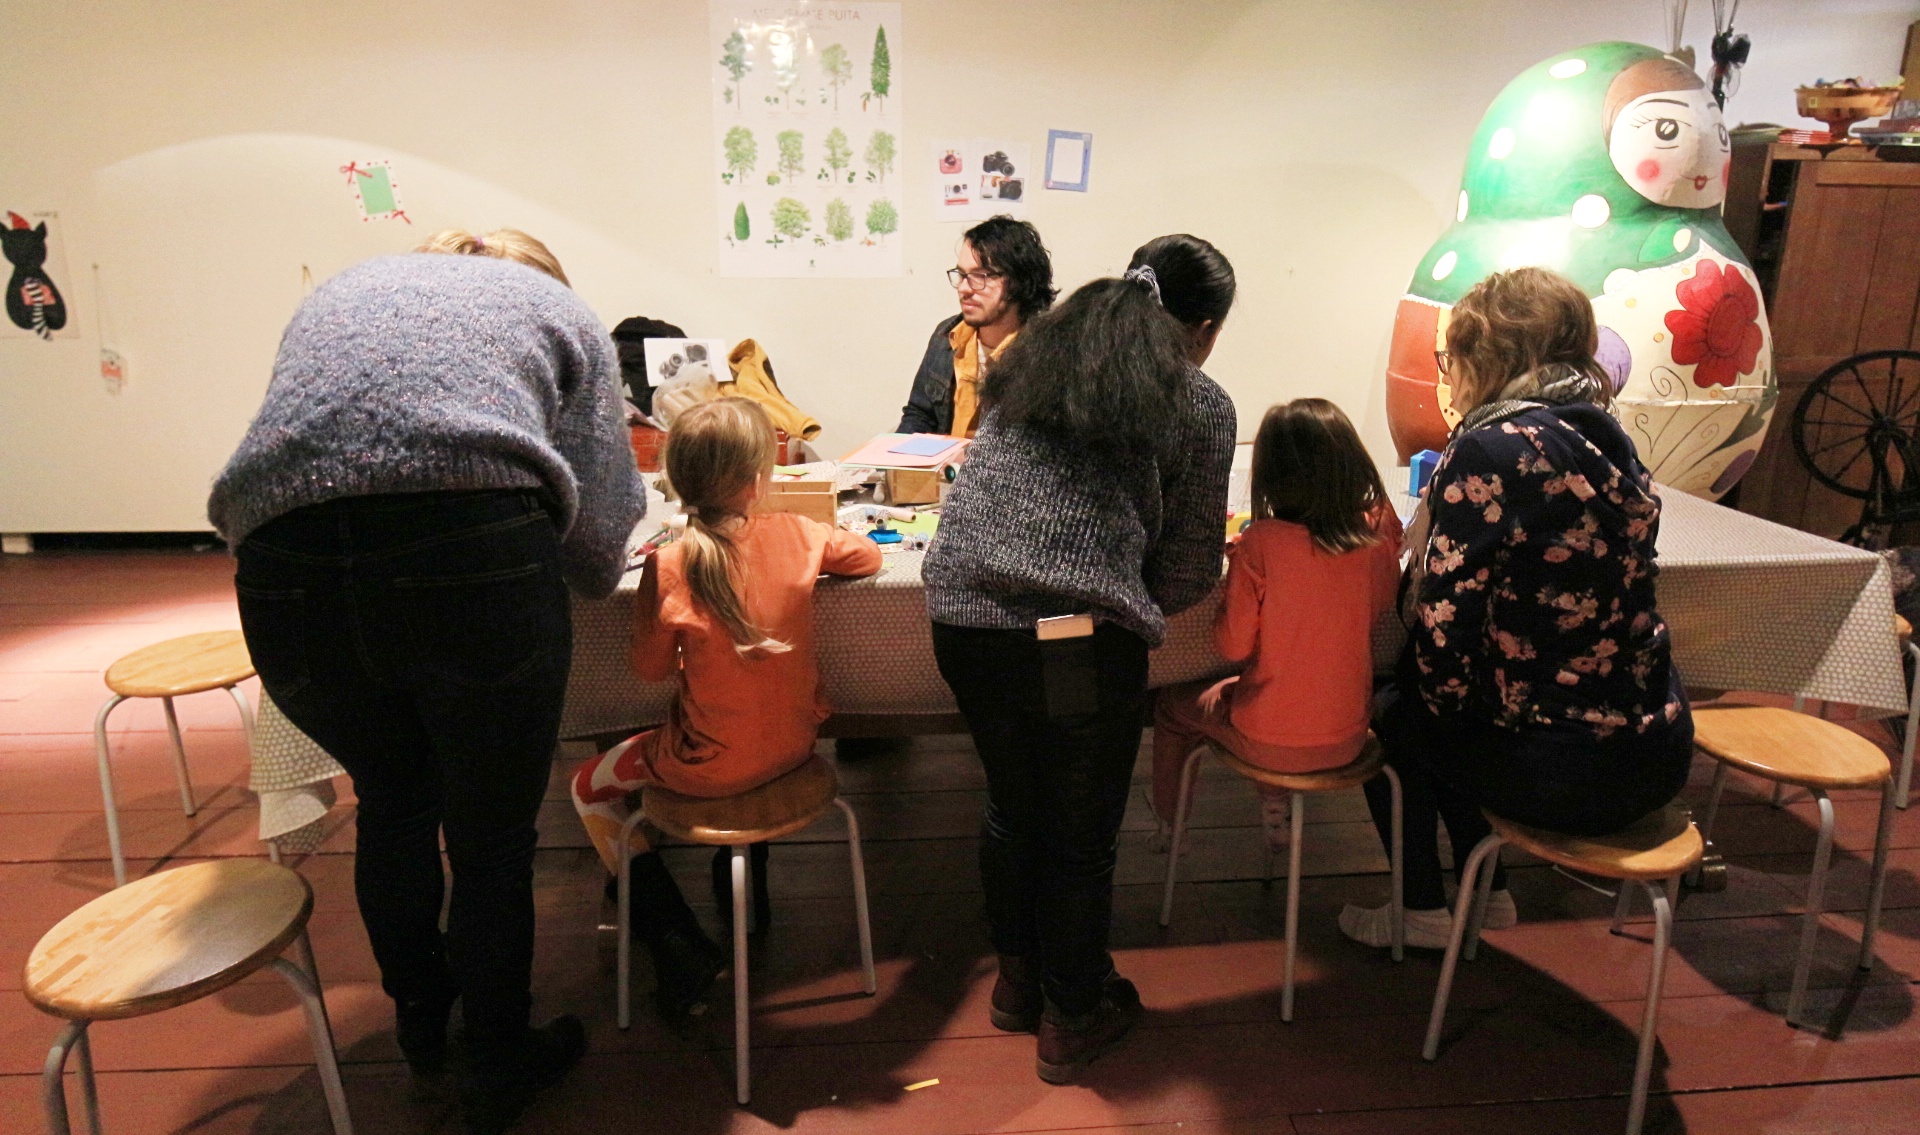 children and adults sit around a table making crafts.